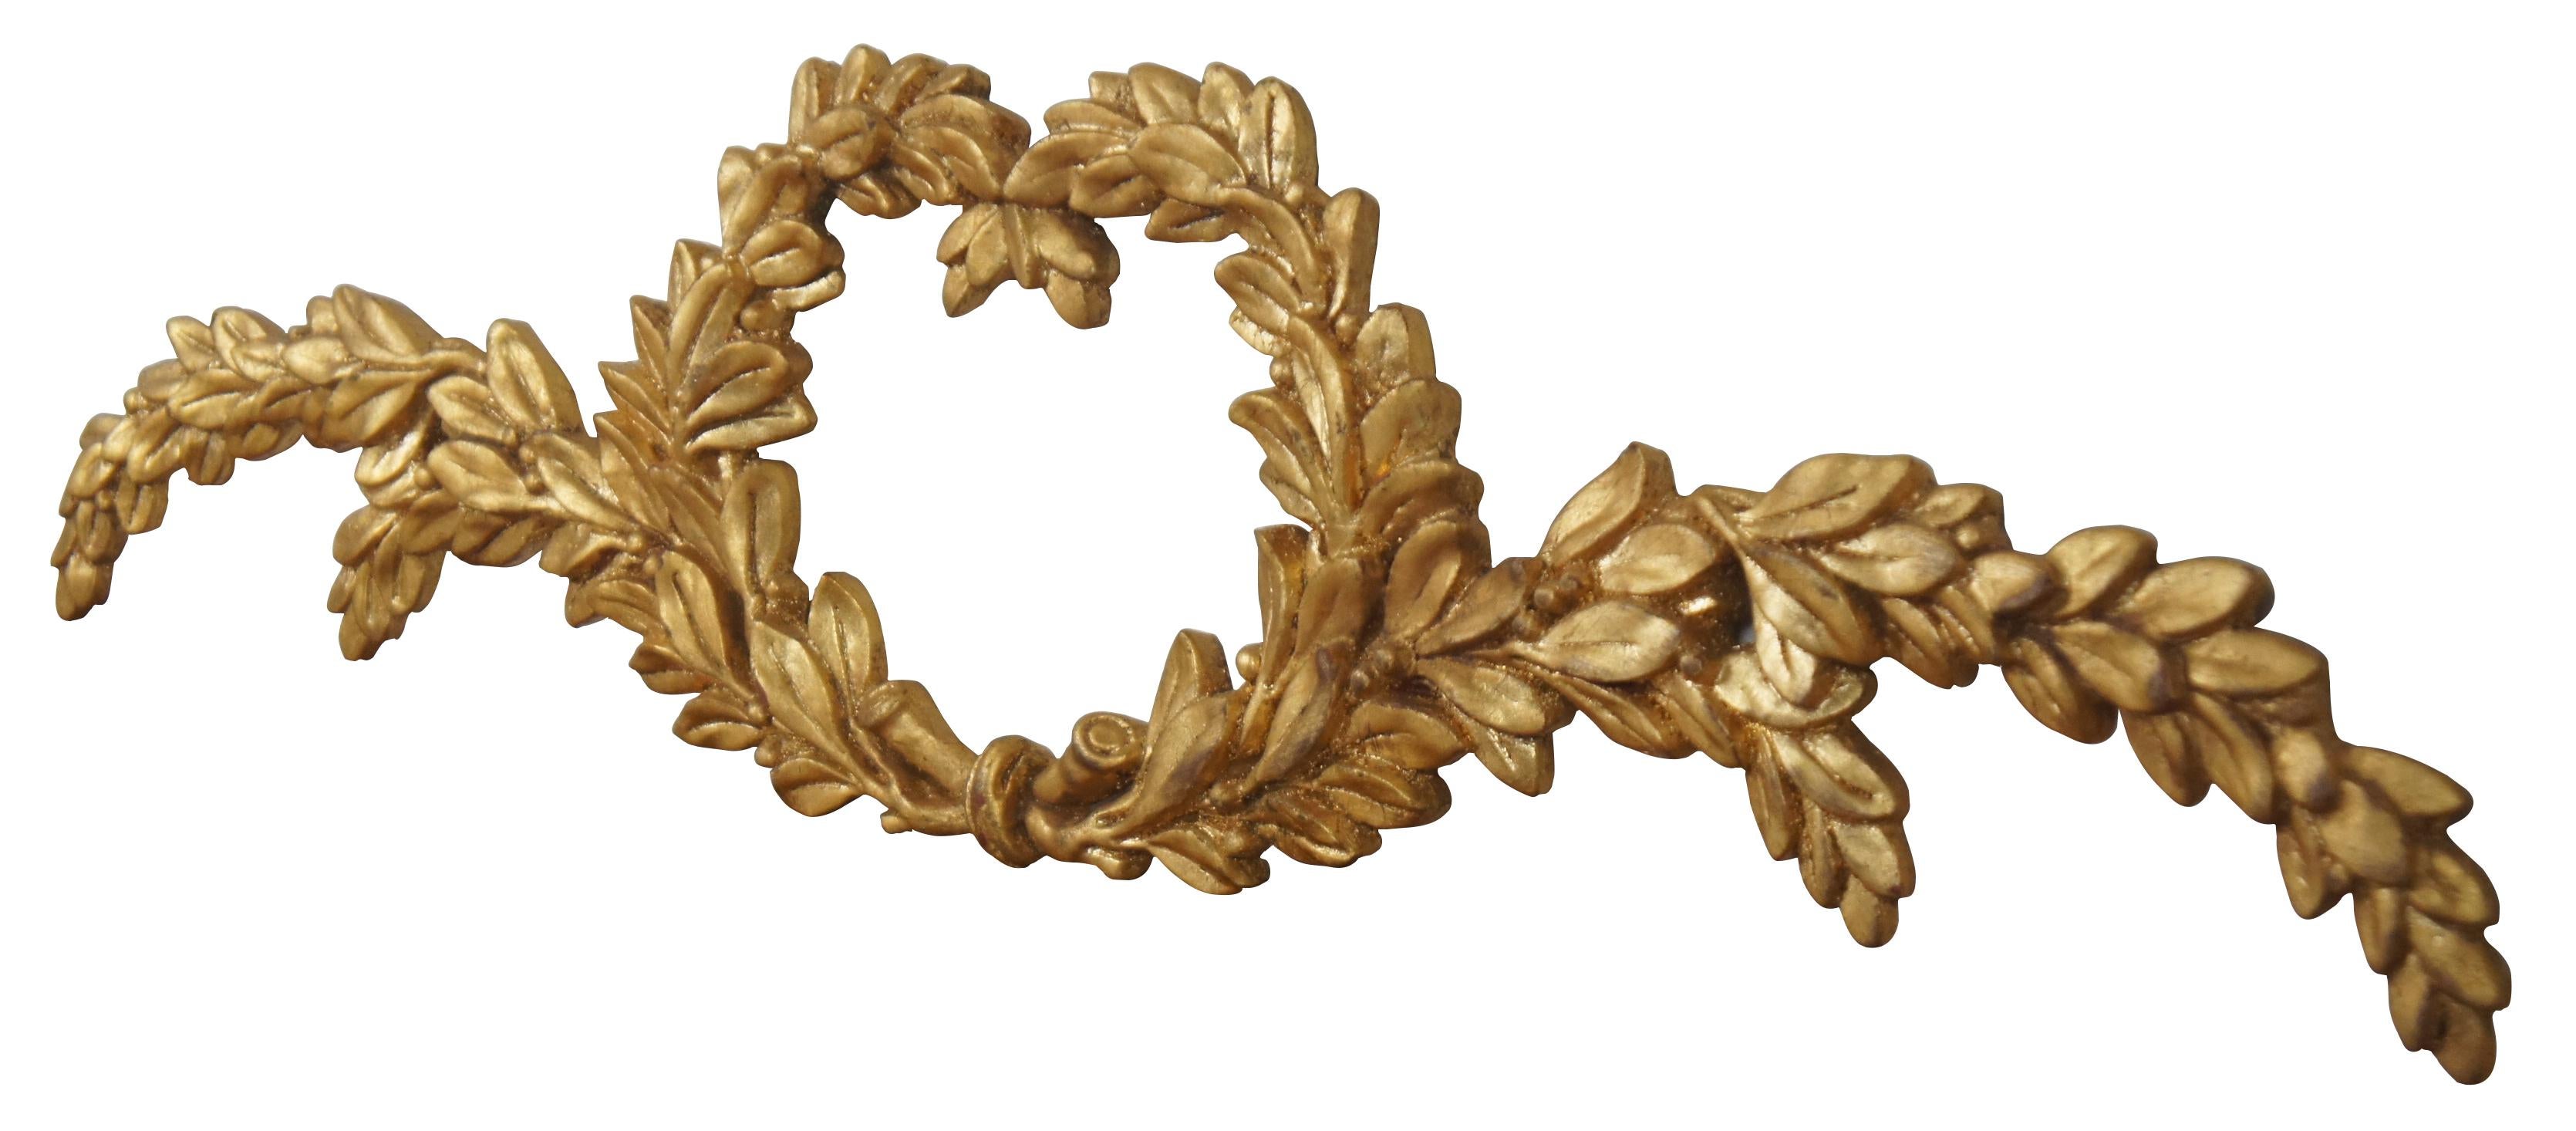 Elegant vintage Louis XVI Neoclassical style carved giltwood garland wall plaque or architectural pediment carved in the shape of sweeping laurel wreath branches. Measure: 30